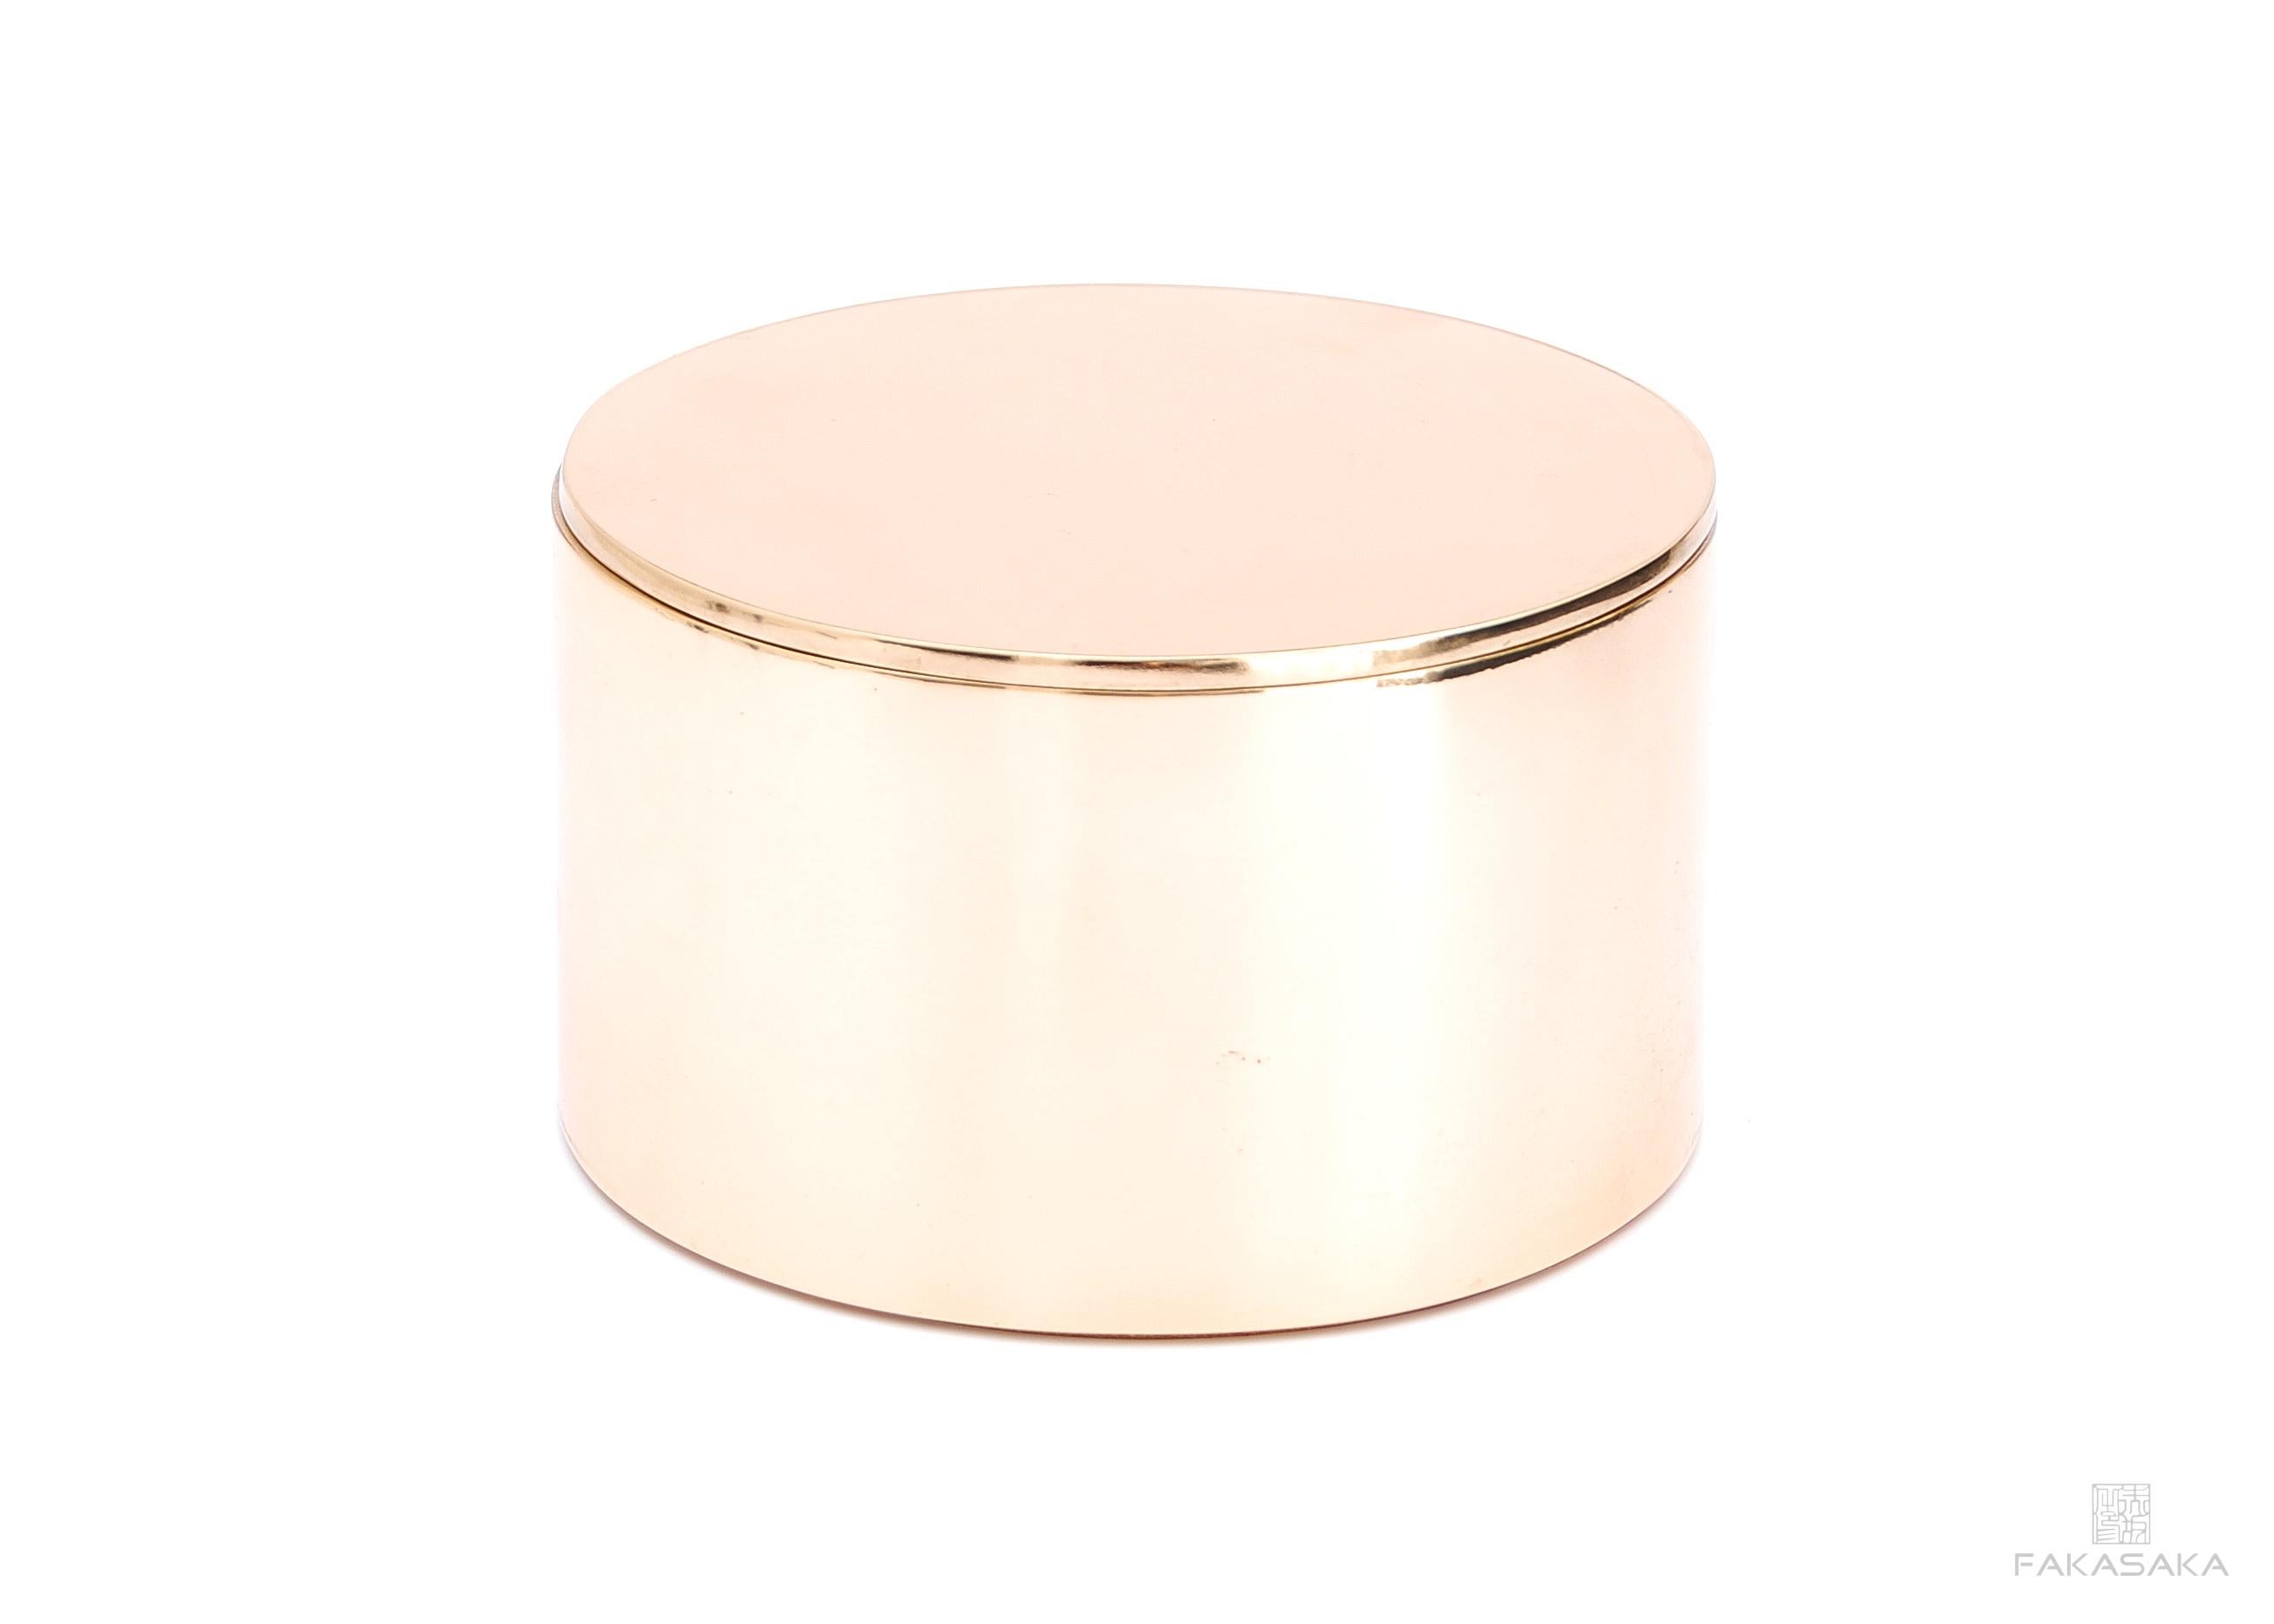 Dido Box by Fakasaka Design
Dimensions: W 15.5 cm D 15.5 cm H 9
Materials: polished bronze.

 FAKASAKA is a design company focused on production of high-end furniture, lighting, decorative objects, jewels, and accessories.

 Established in